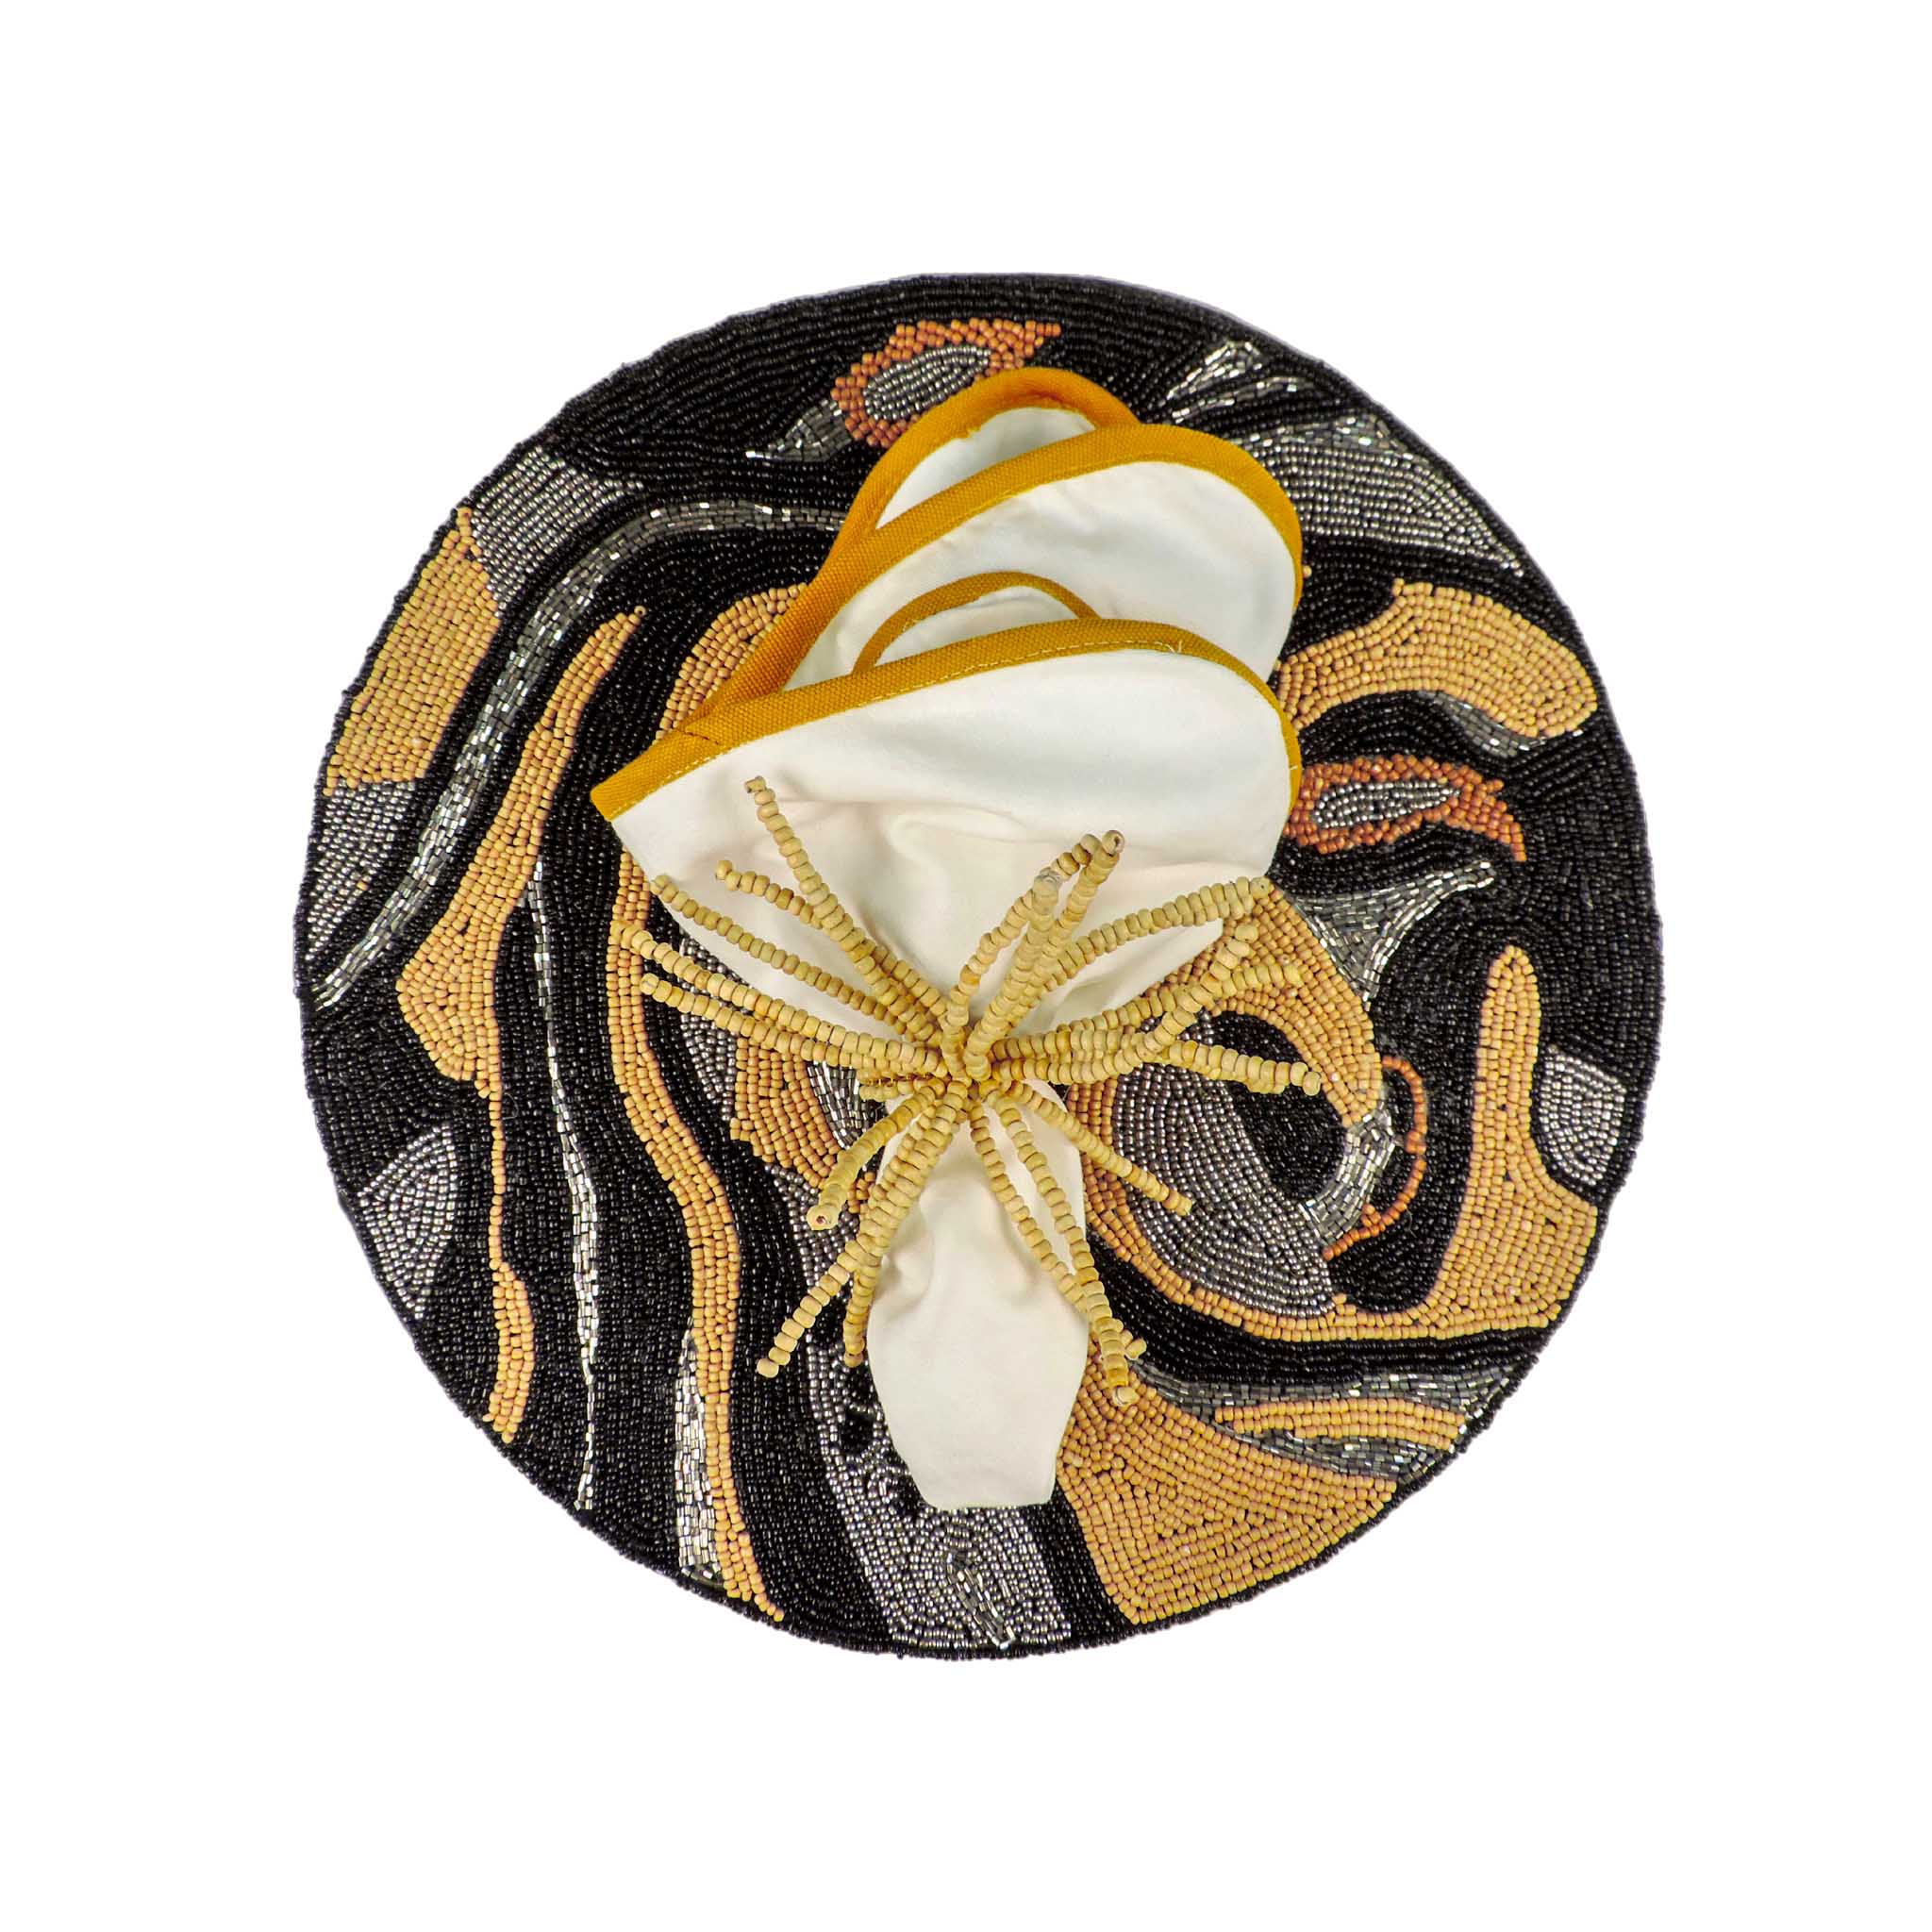 Modern Camo Glass Bead Embroidered Placemat in Natural & Black, Set of 2/4